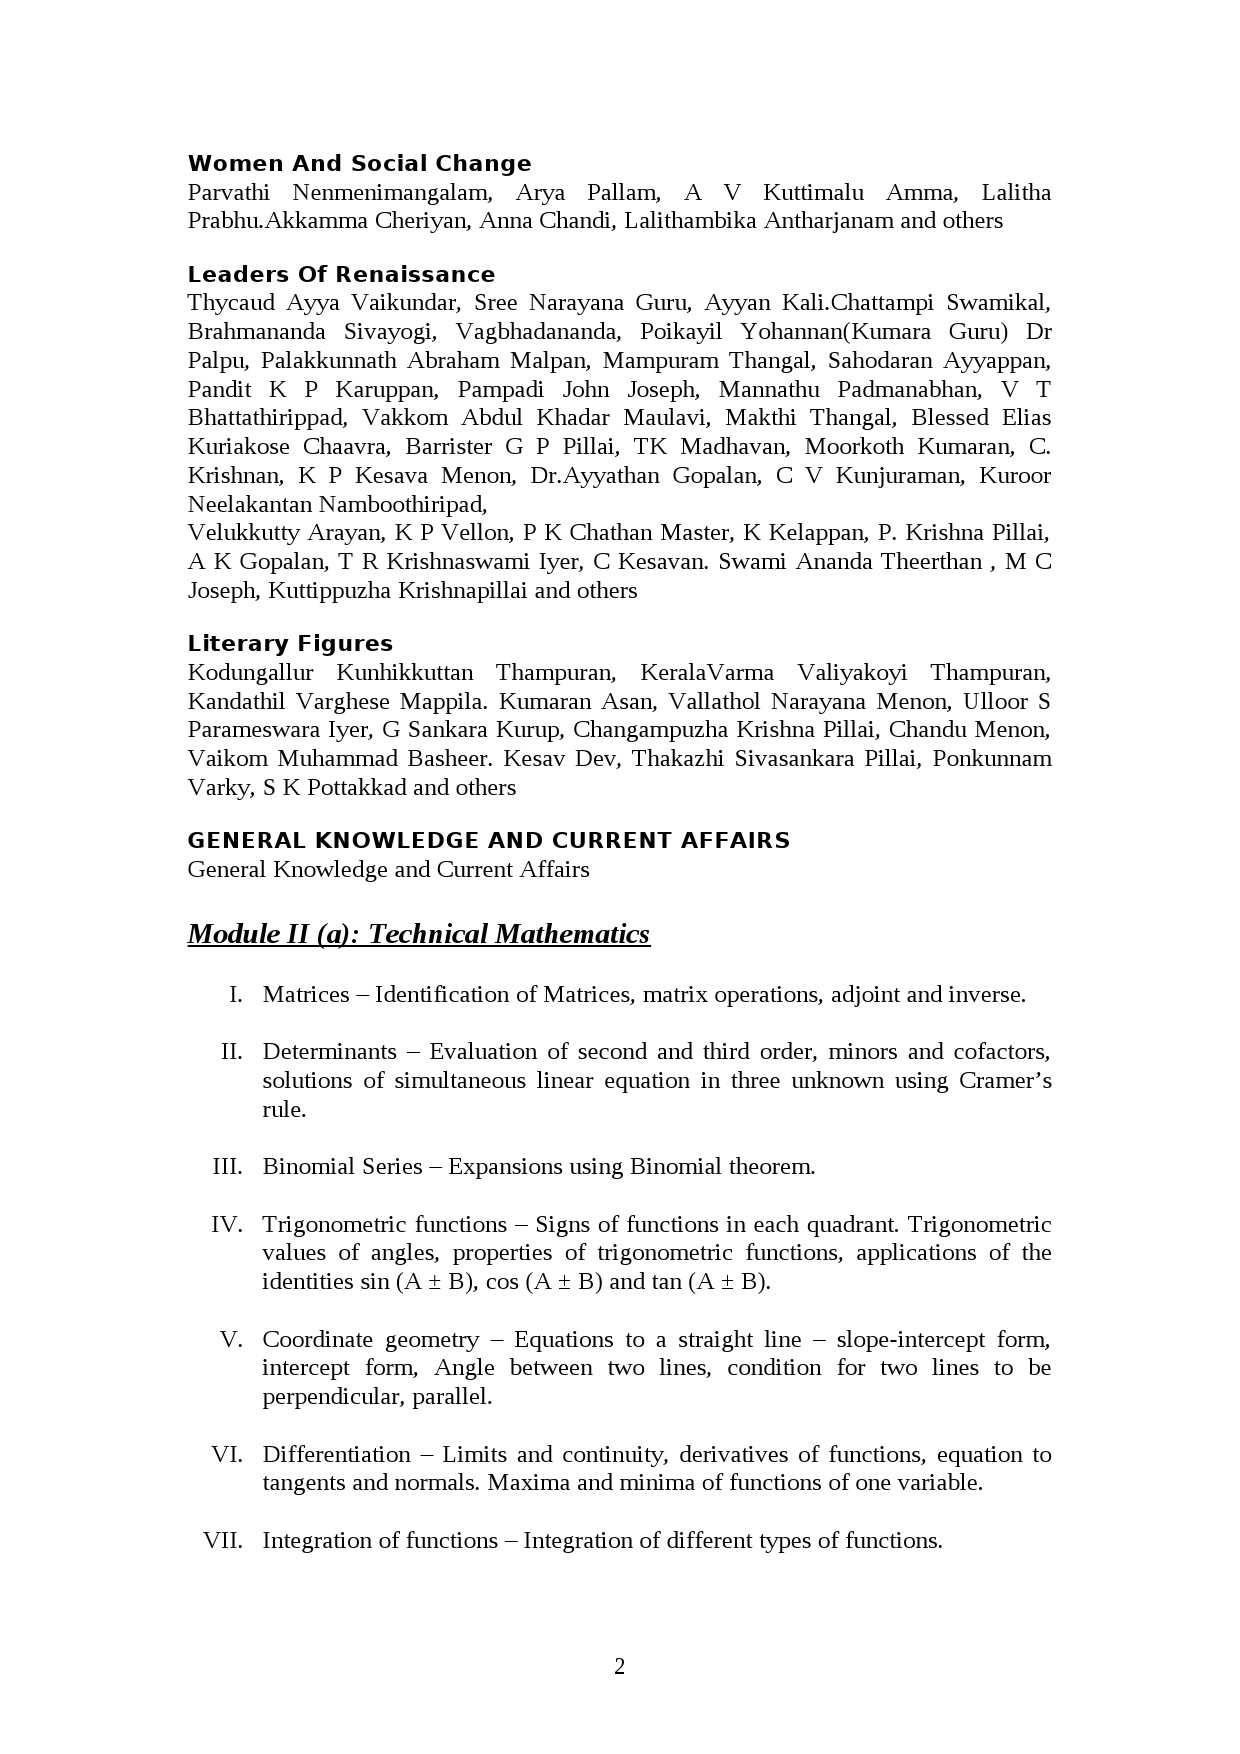 Textile Technology Lecturer in Polytechnic Exam Syllabus - Notification Image 2